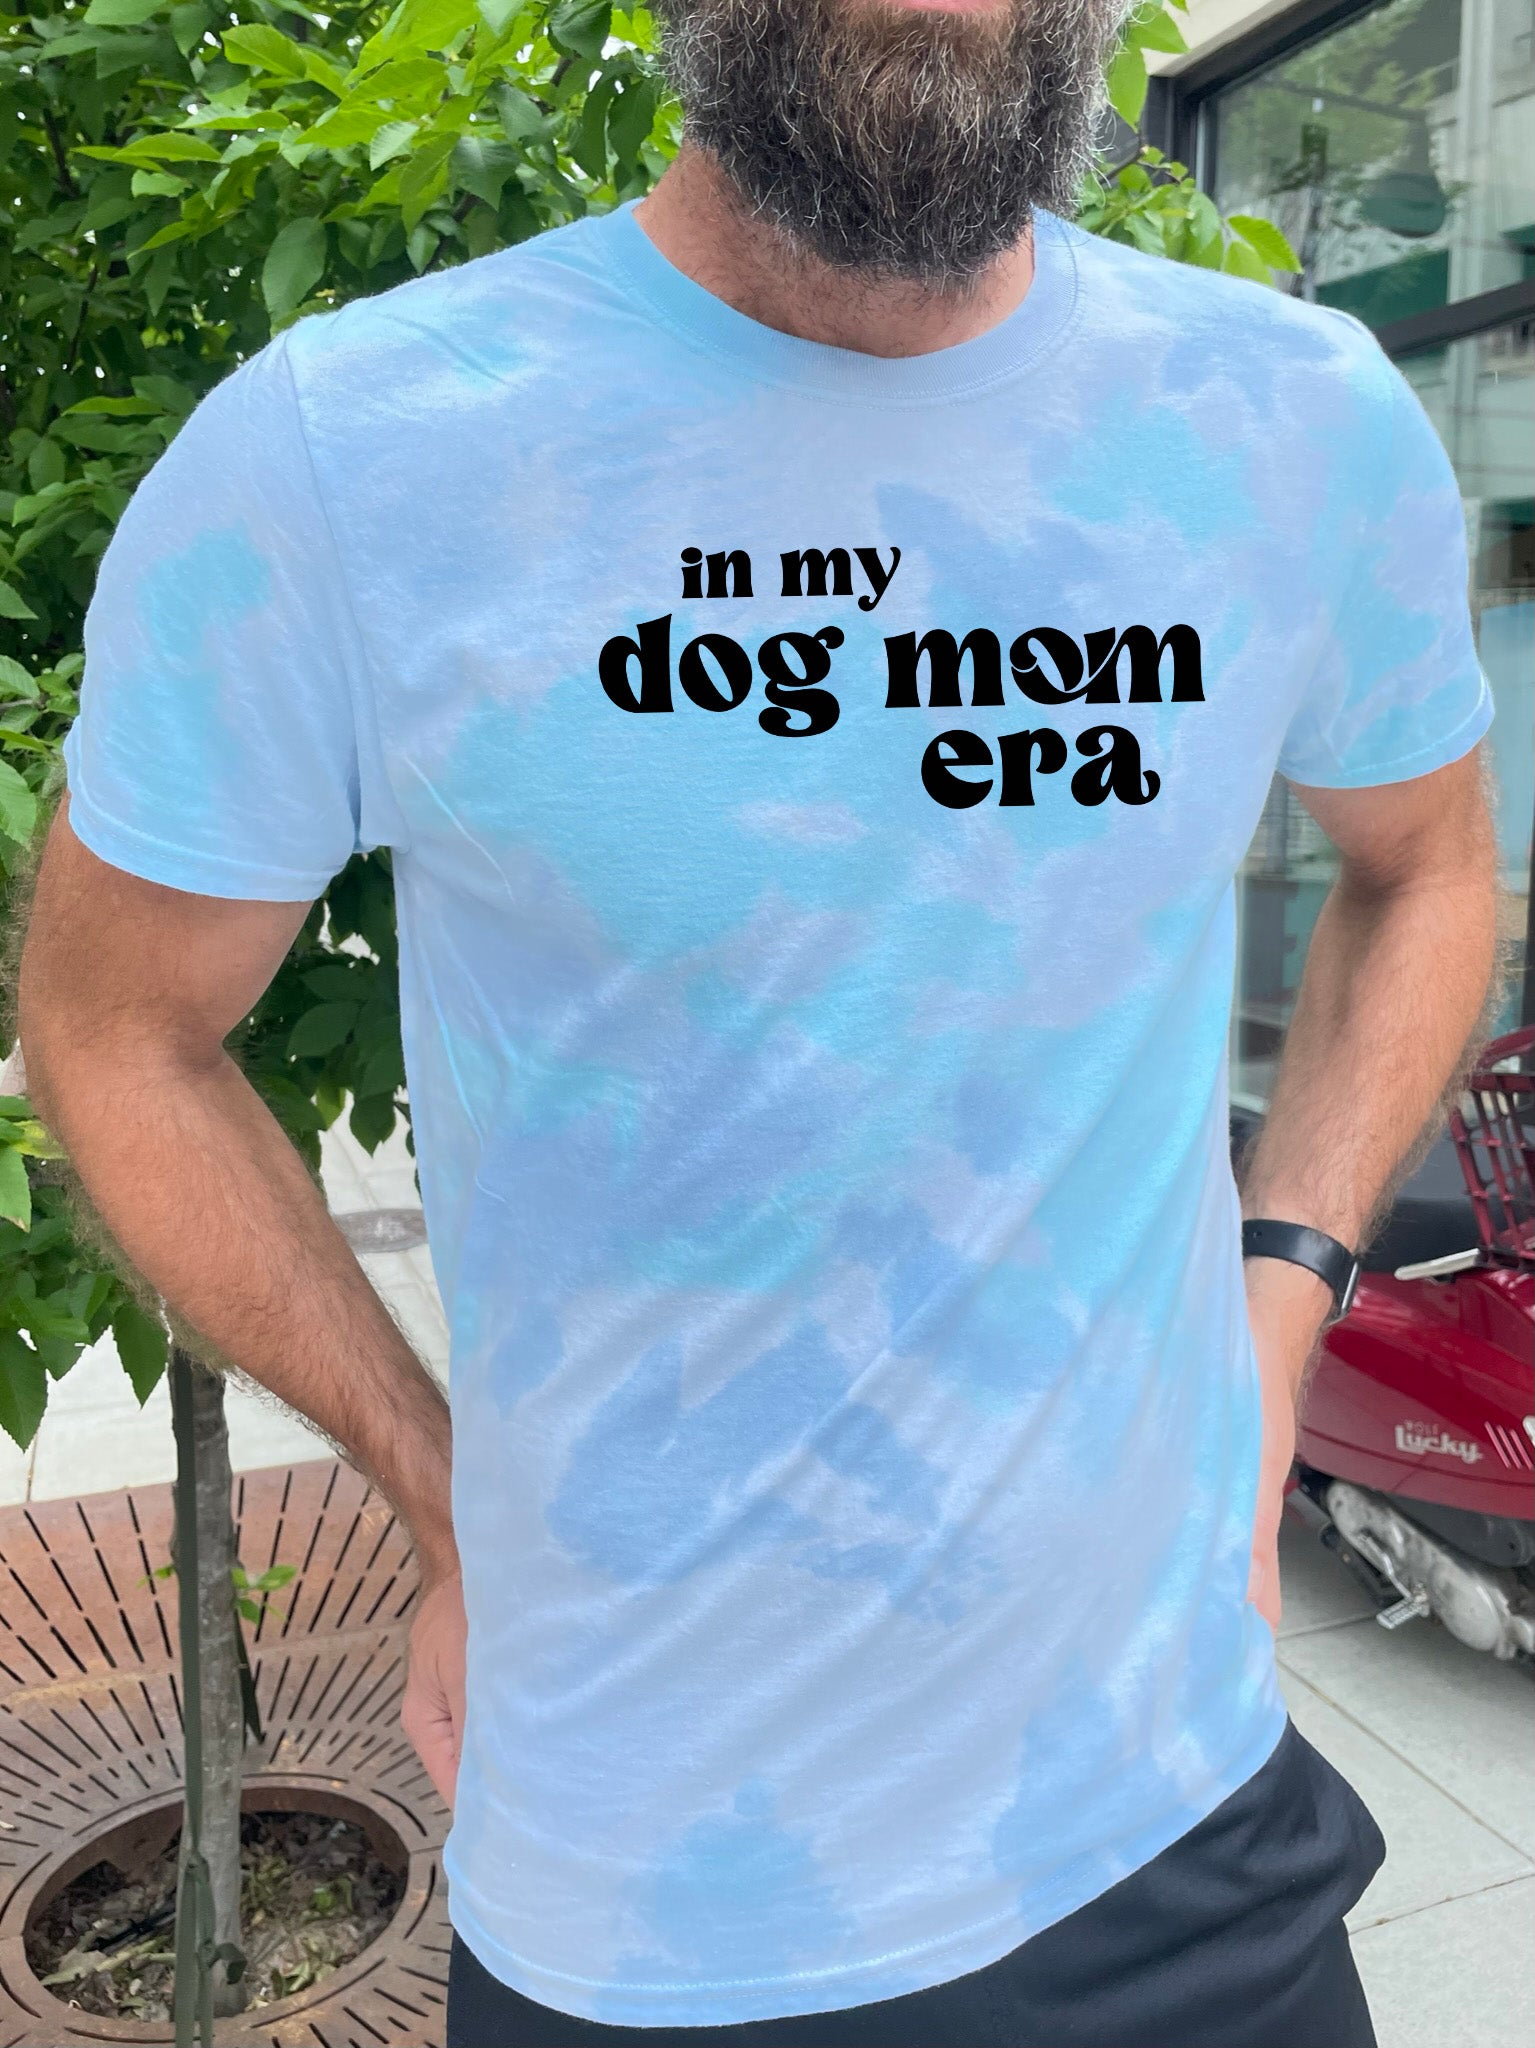 a man with a beard wearing a t - shirt that says in my dog mom